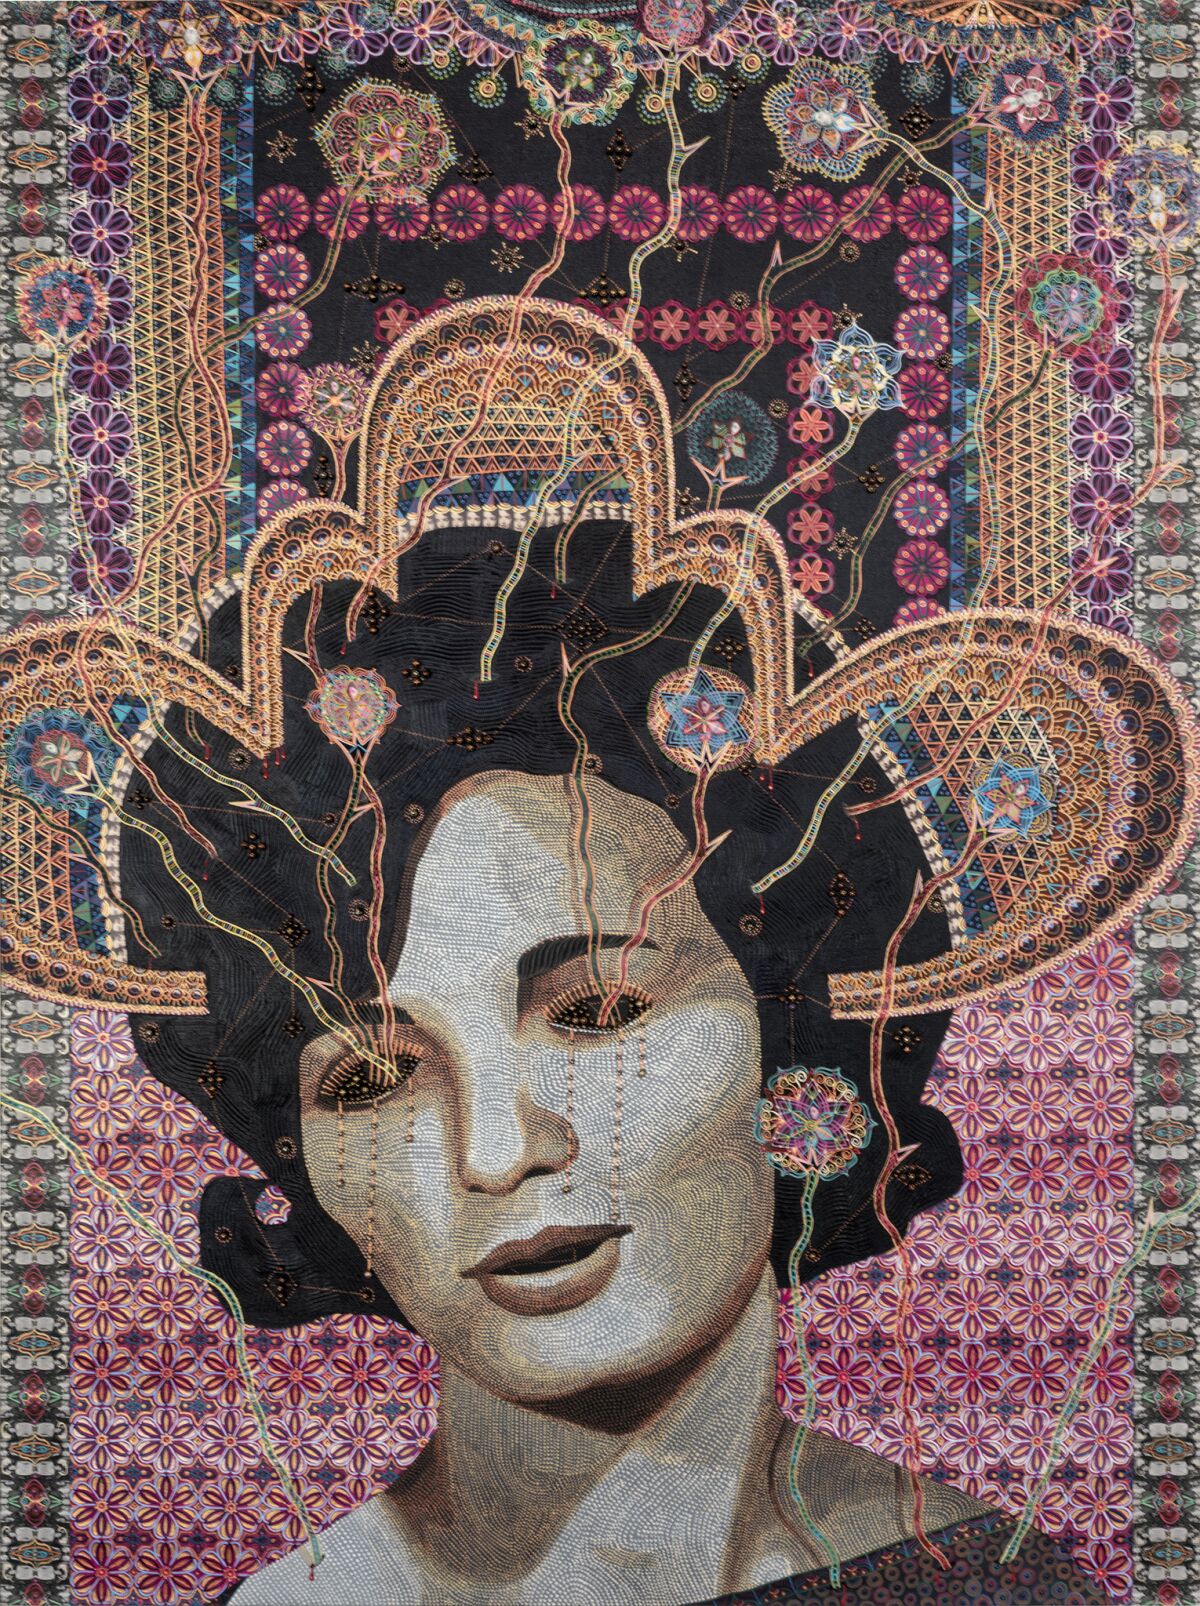 "Les Femmes d'Alger, #VI" by Asad Faulwell, 2018. Acrylic, pins and photo collage on canvas, 48 inches by 36 inches.